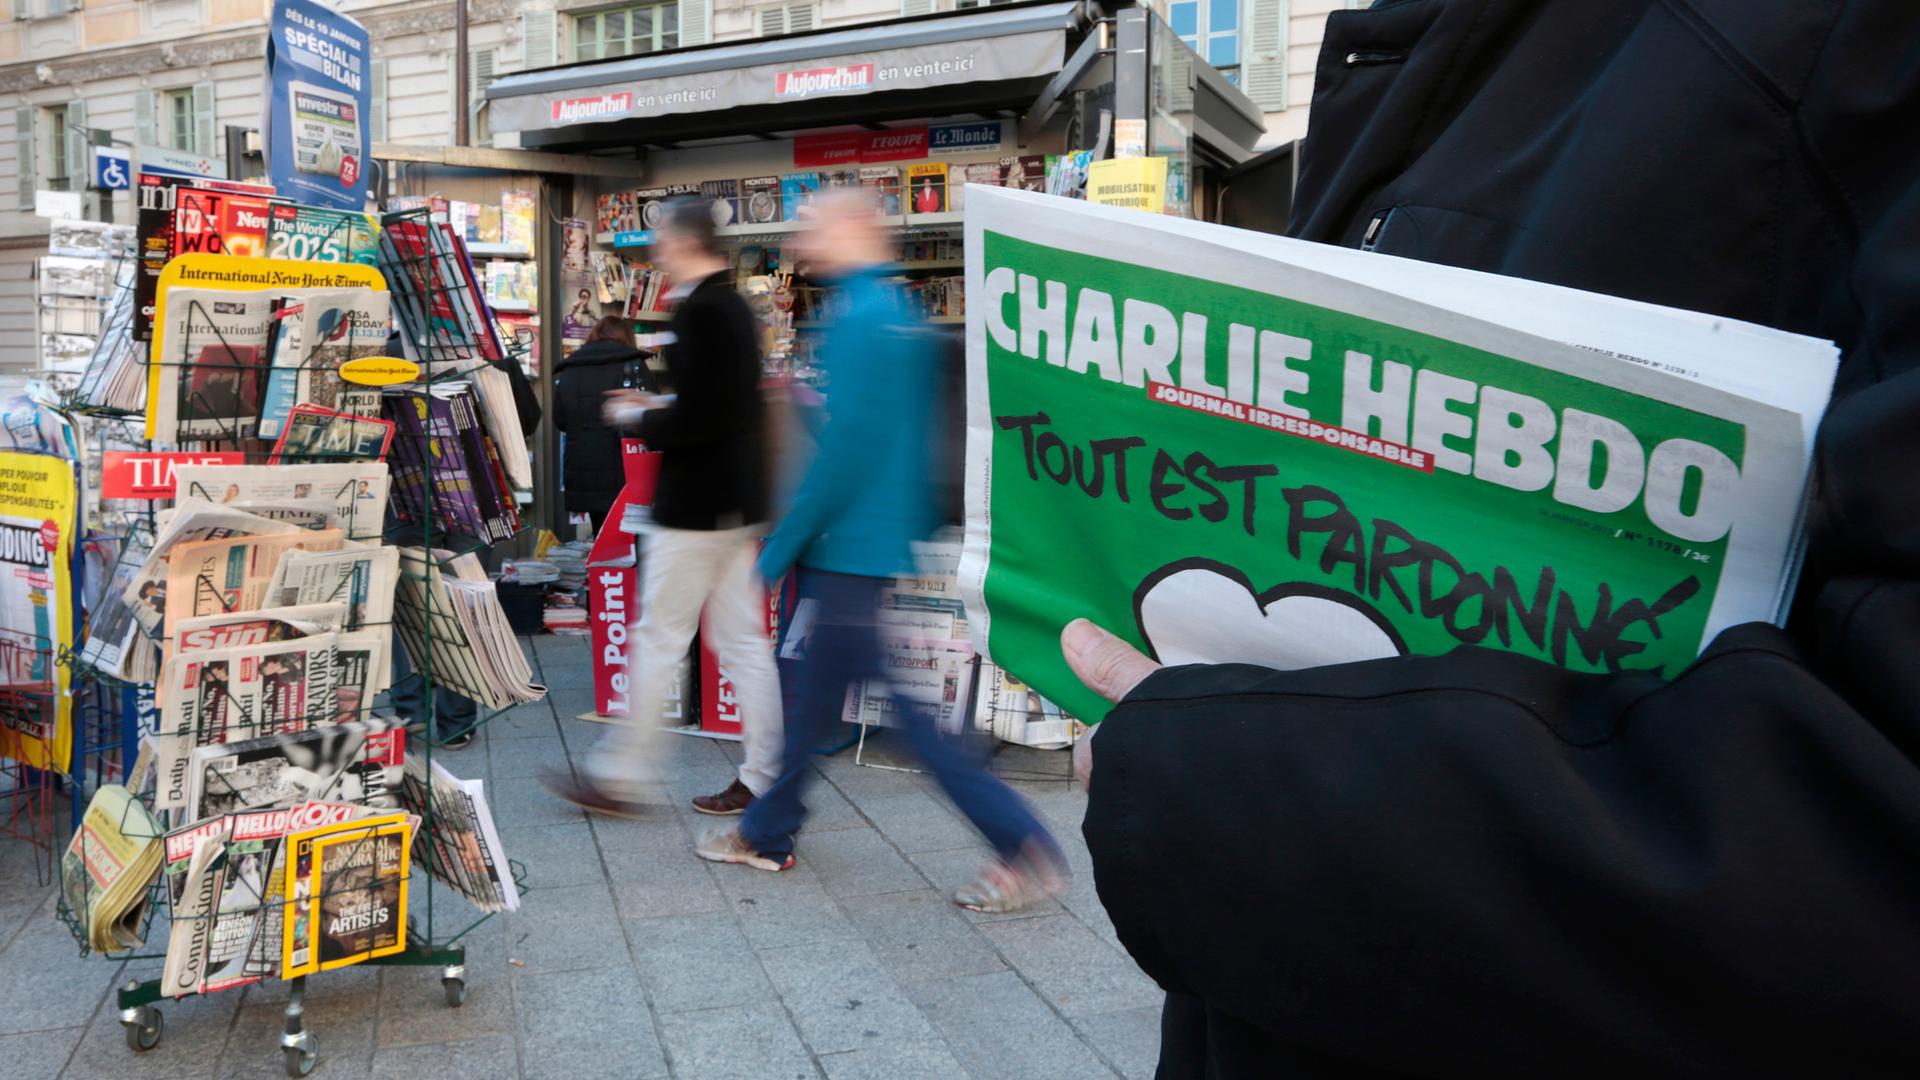 A man holds the new issue of satirical French weekly Charlie Hebdo, entitled "Tout est pardonné" ("All is forgiven"), at a kiosk in Nice on January 14, 2015.  